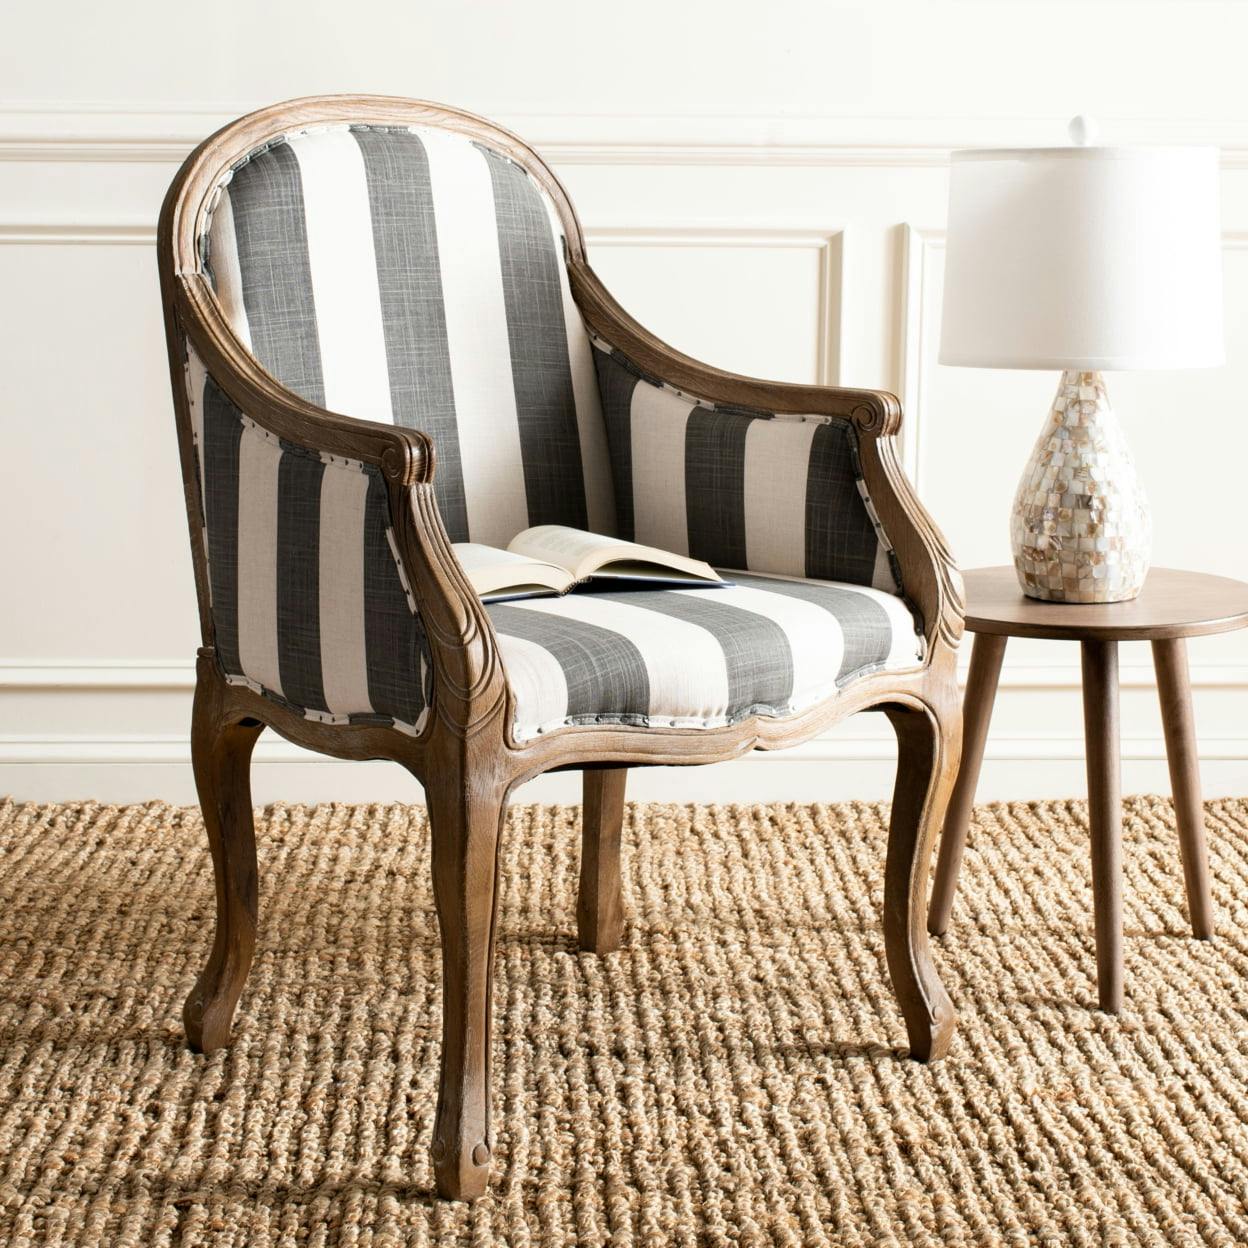 Transitional Esther Striped Arm Chair in Grey & White with Oak Frame